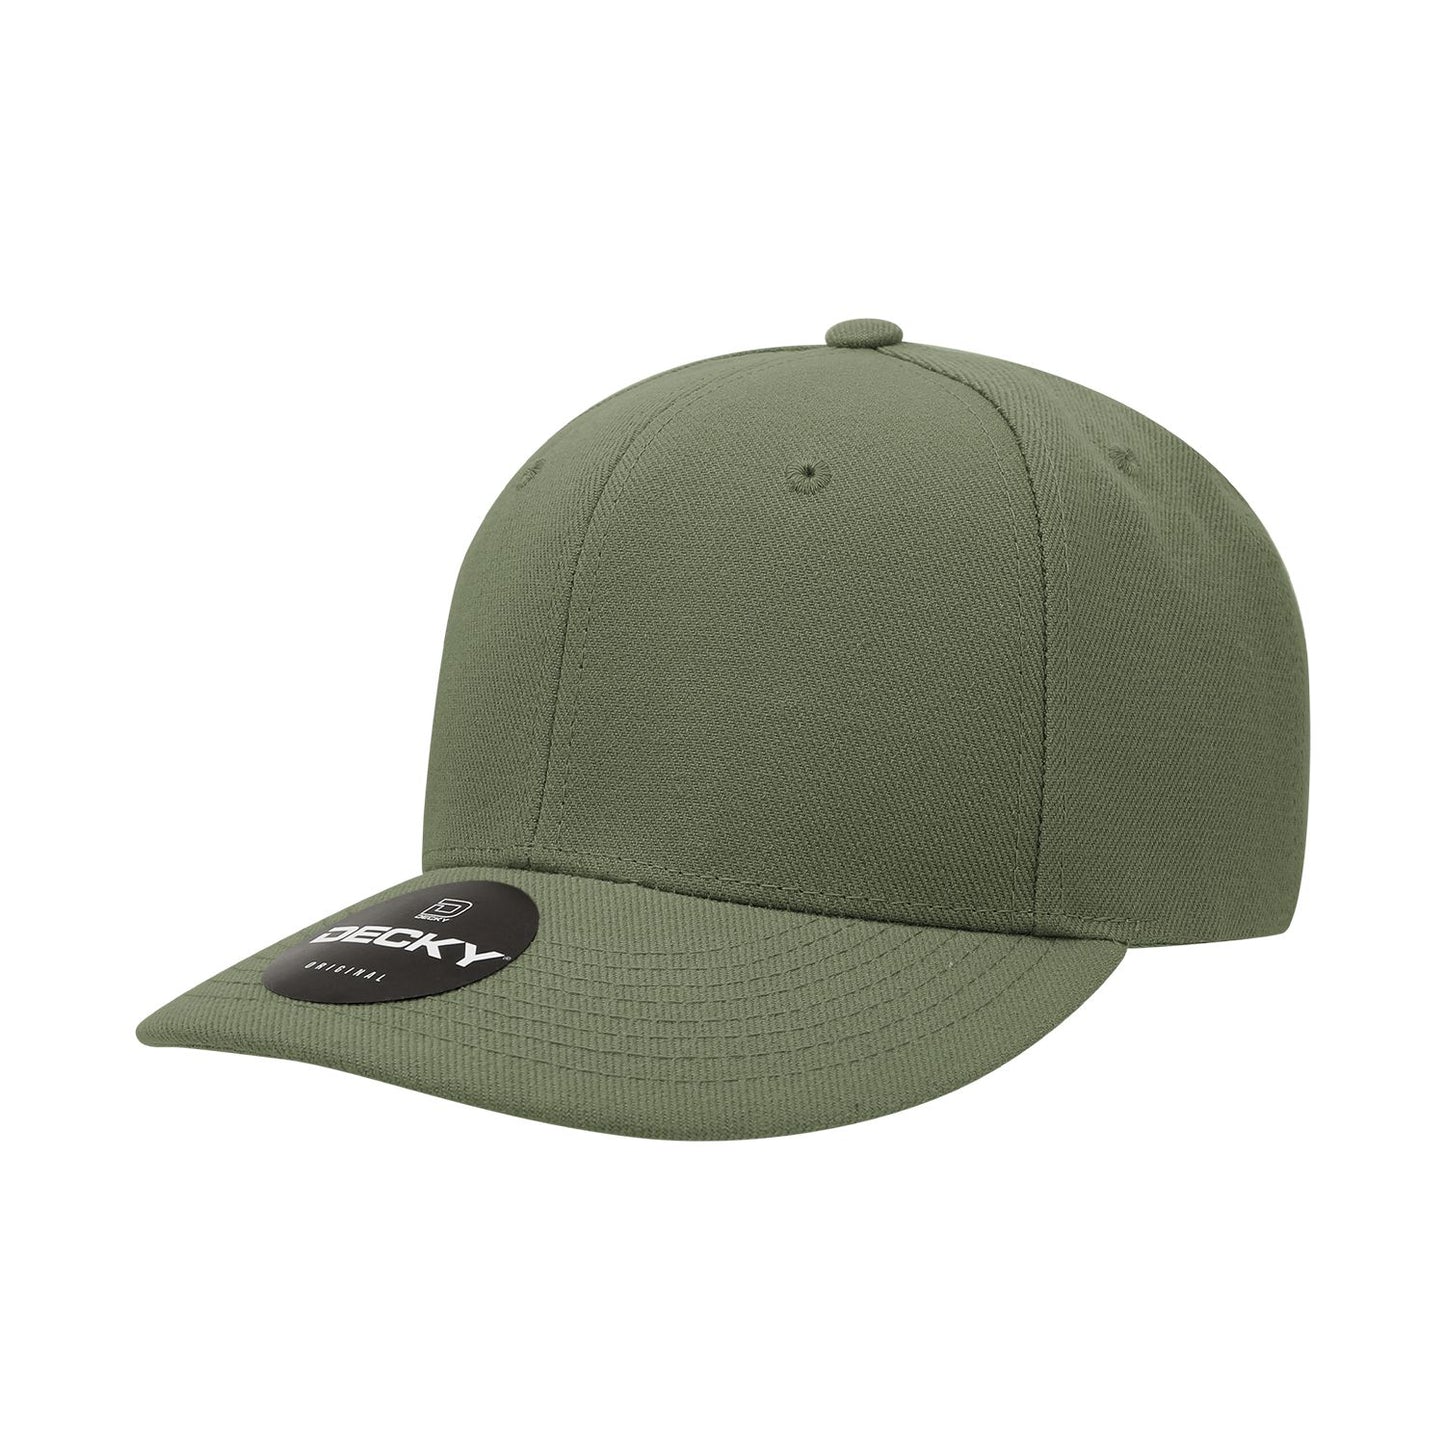 Decky 207 Deluxe Mid Pro Baseball Hat, 6 Panel Structured Cap - Blank